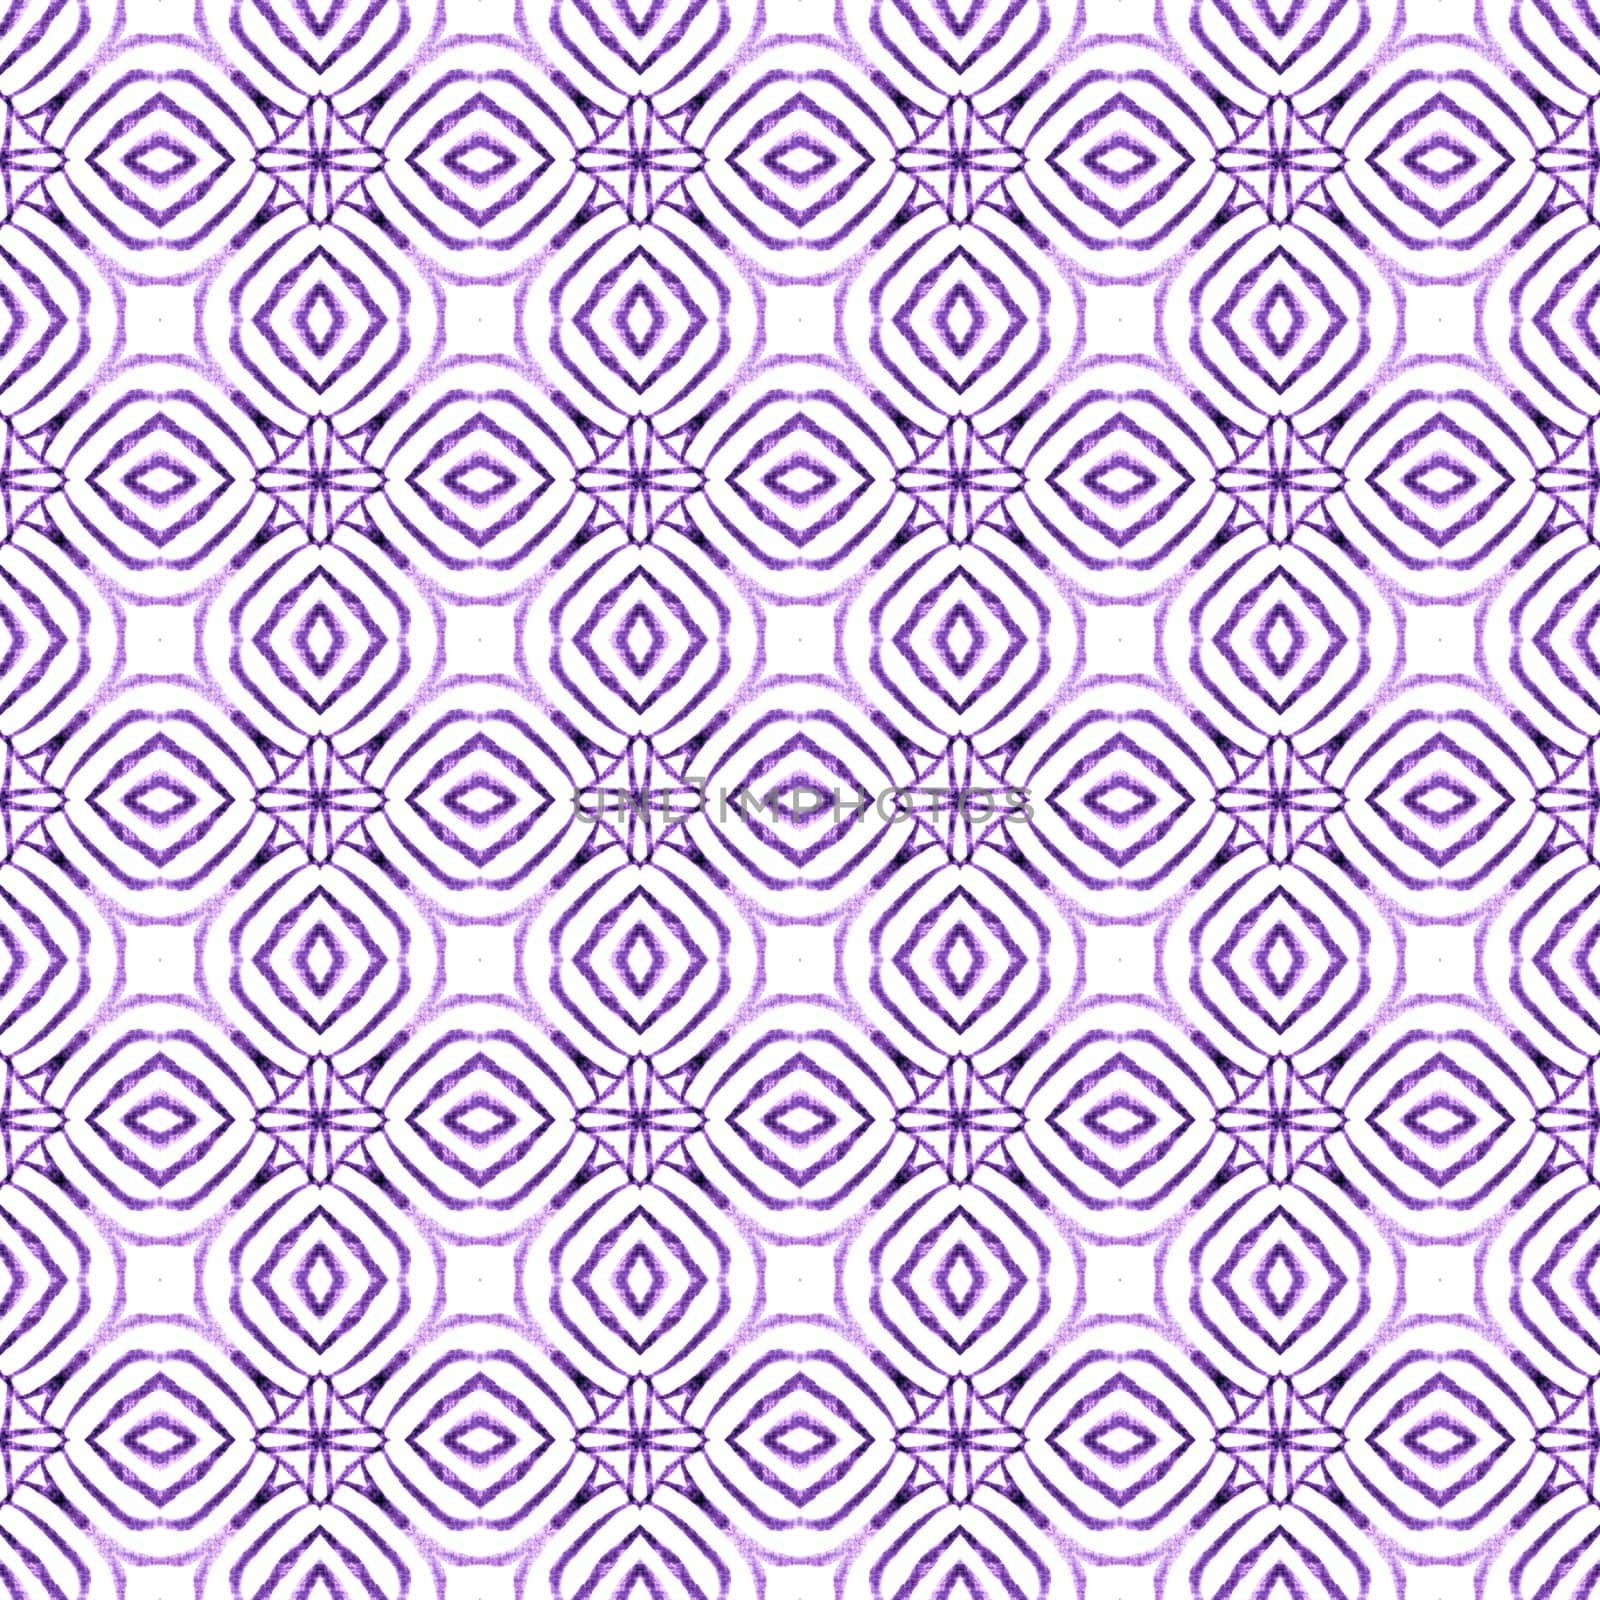 Watercolor ikat repeating tile border. Purple fetching boho chic summer design. Textile ready modern print, swimwear fabric, wallpaper, wrapping. Ikat repeating swimwear design.